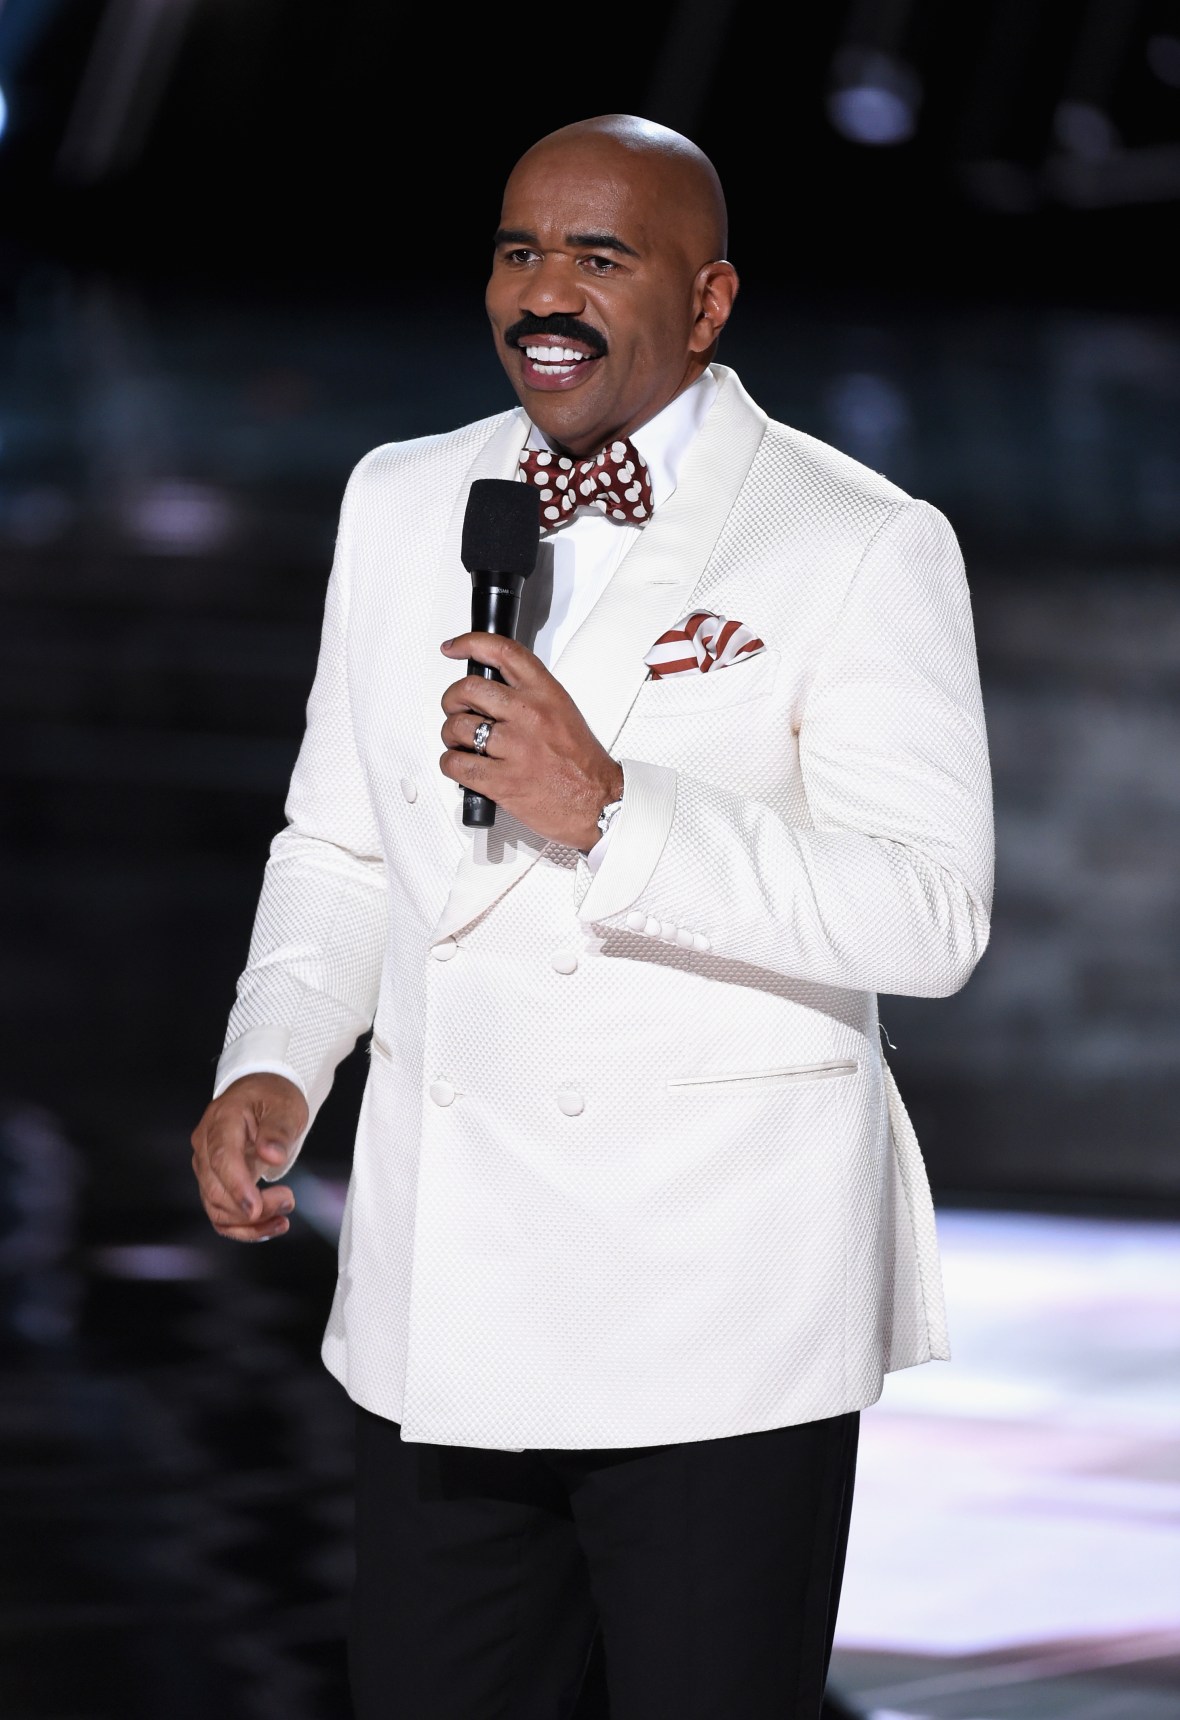 Steve Harvey / Steve Harvey Experienced Homelessness for 3 Years — 'It ... - Named broderick by his coal miner father jesse harvey and his mother eloise vera.